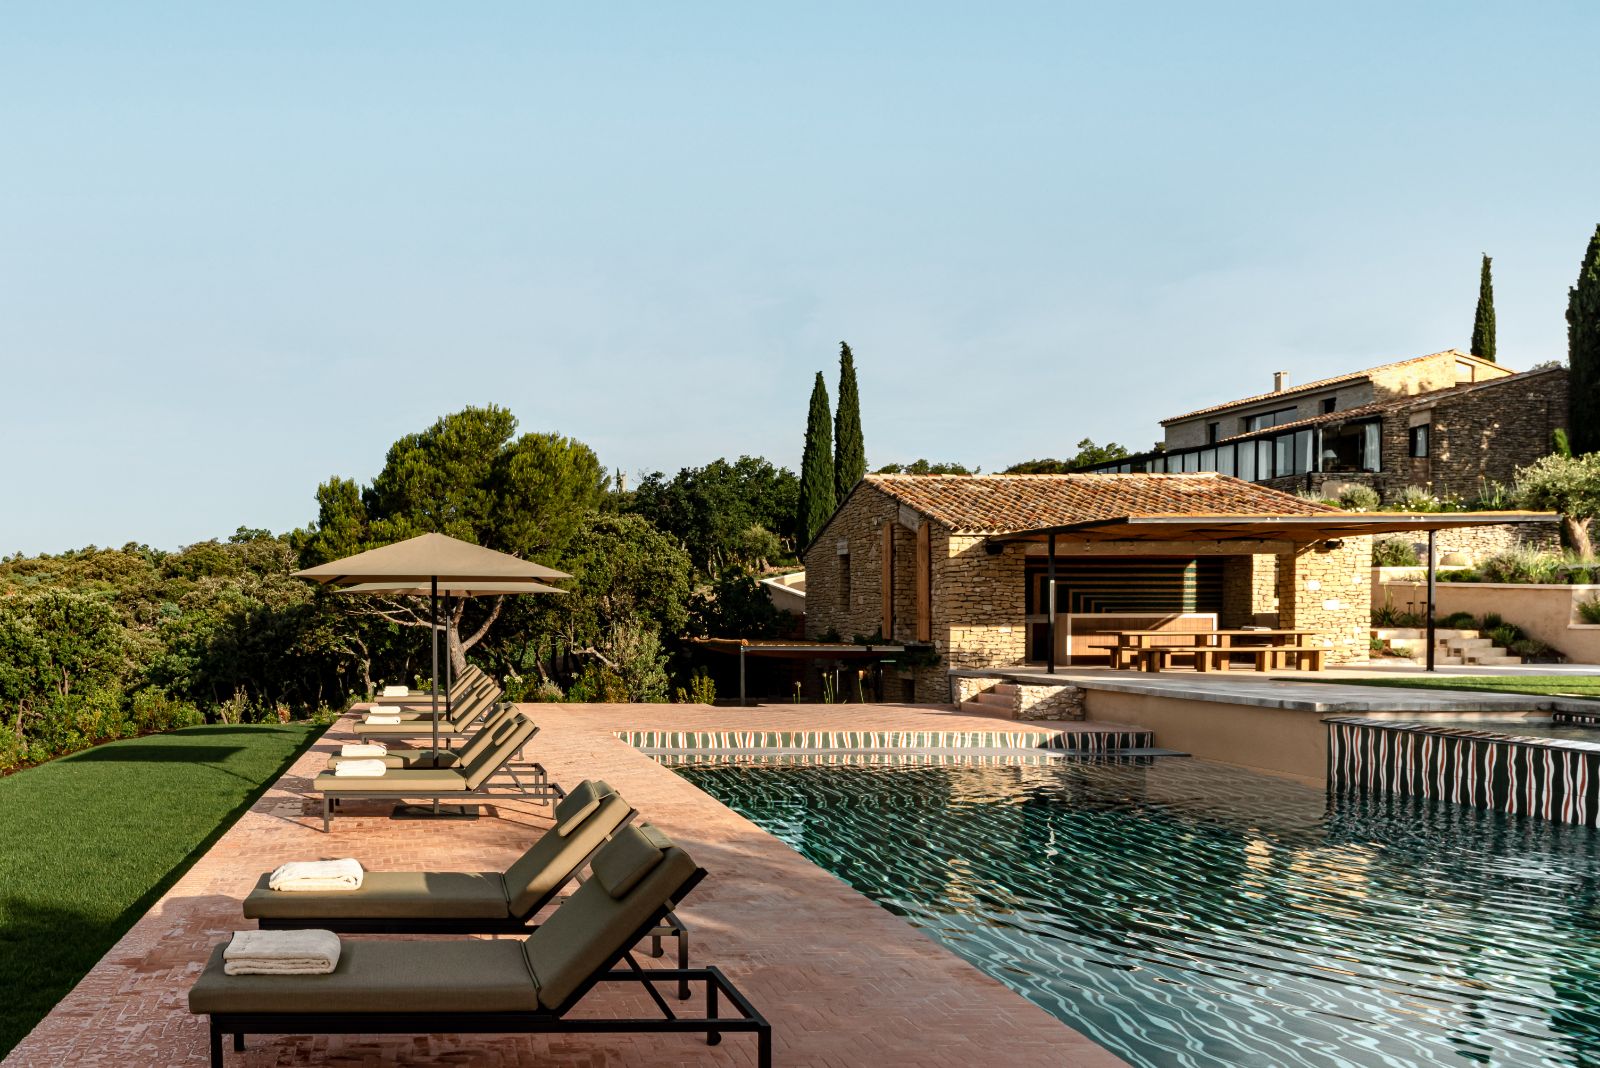 Poolside at Mas de Maillet in Provence